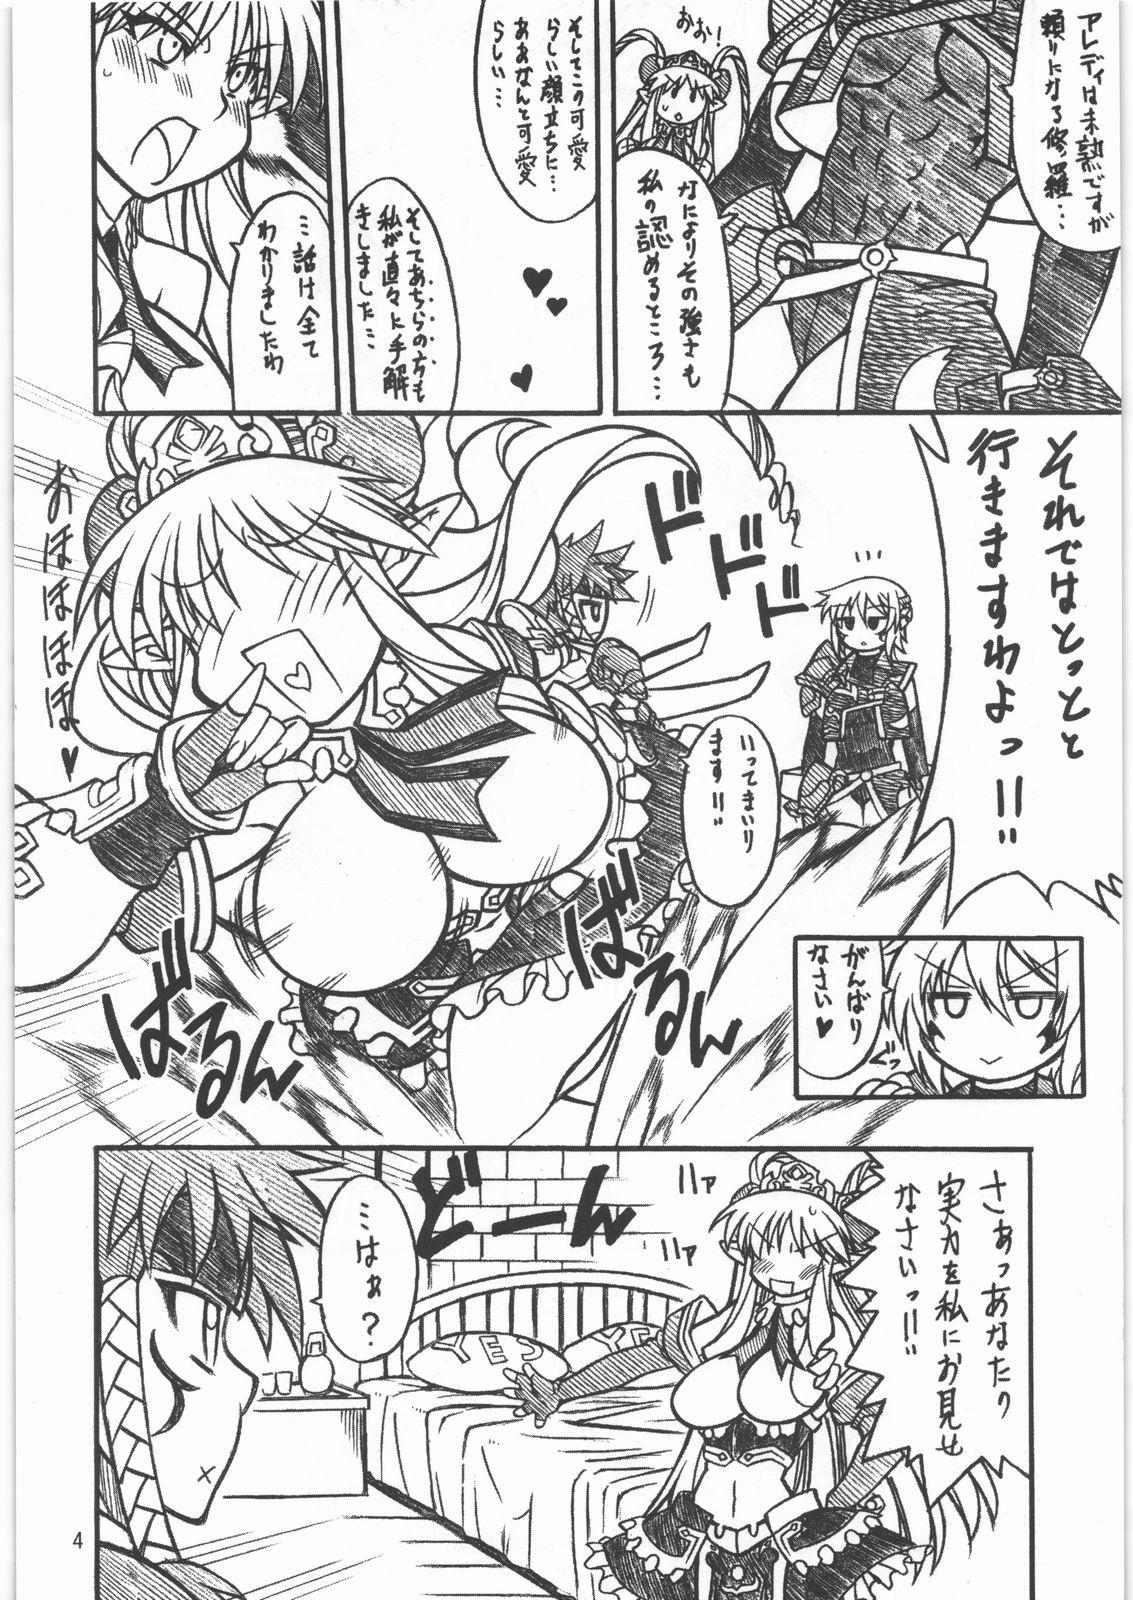 Old Vs Young Midara Hime EXCEED - Super robot wars Endless frontier Futa - Page 3